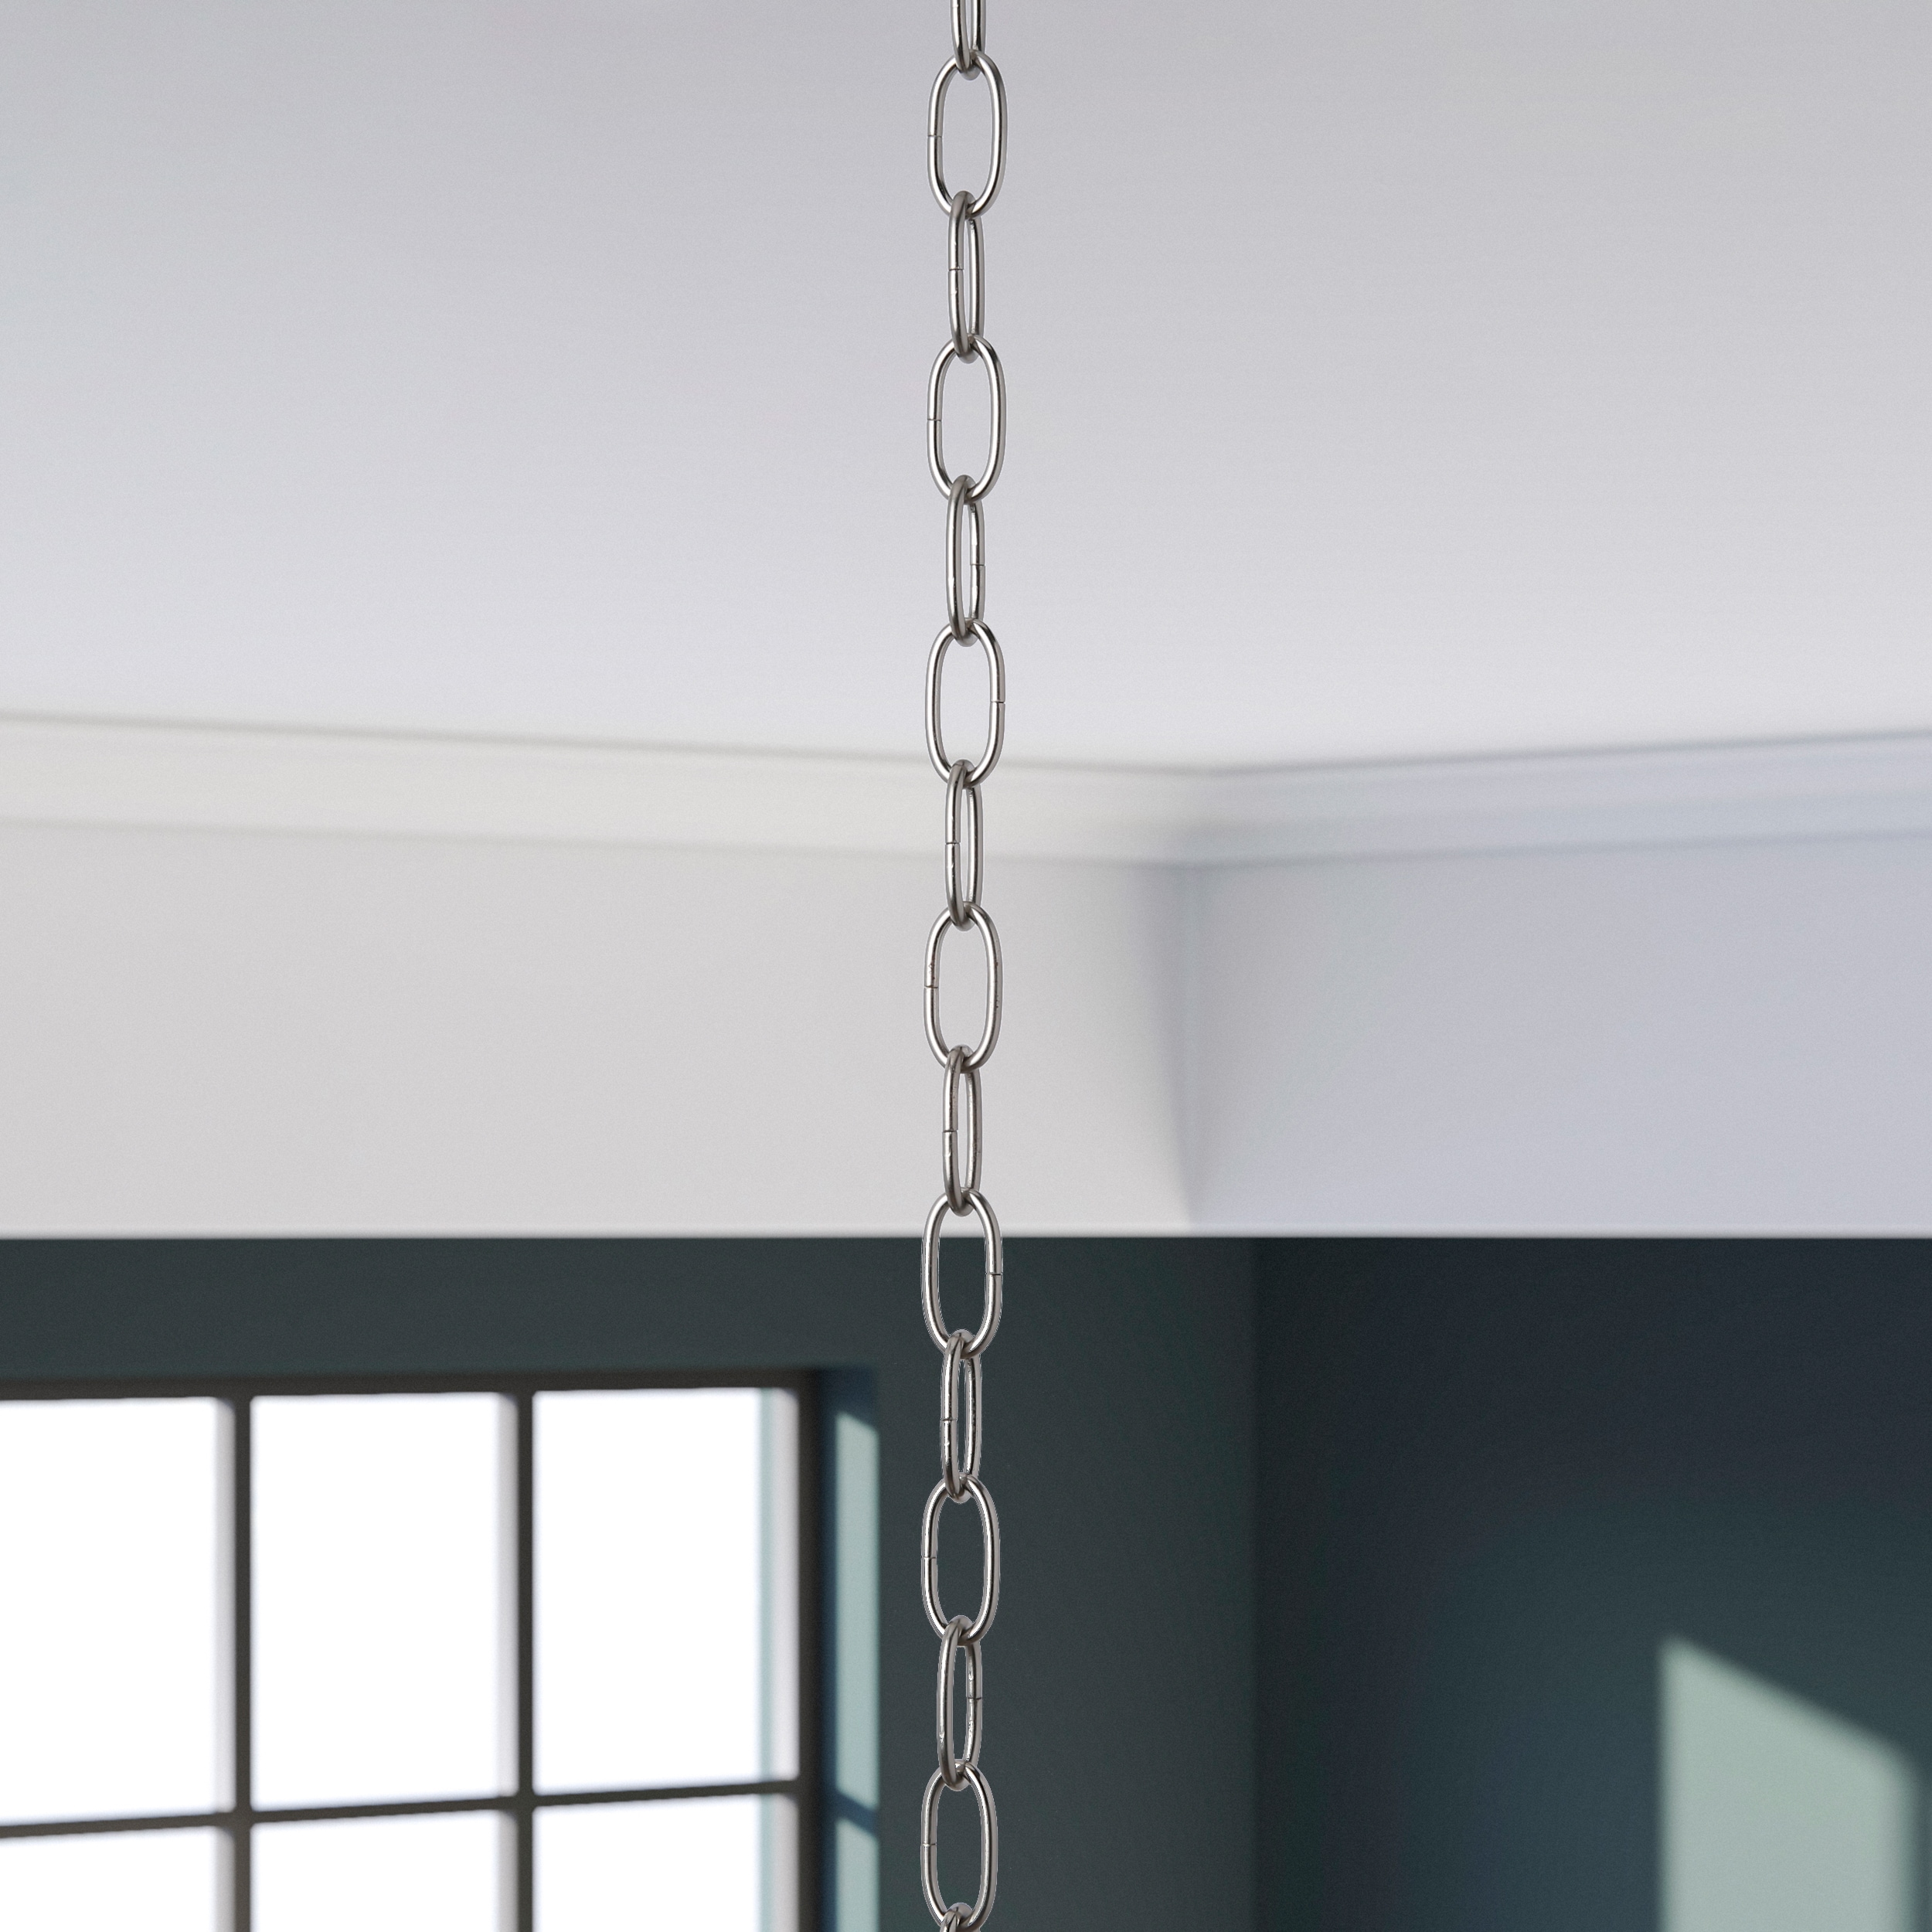 Brushed Nickel Progress Lighting P8757-09 10 Feet of 9 Gauge Chain Permits Installation of Chain-Hung Fixtures on High Ceilings with Maximum Fixture Weight of 50 Pounds